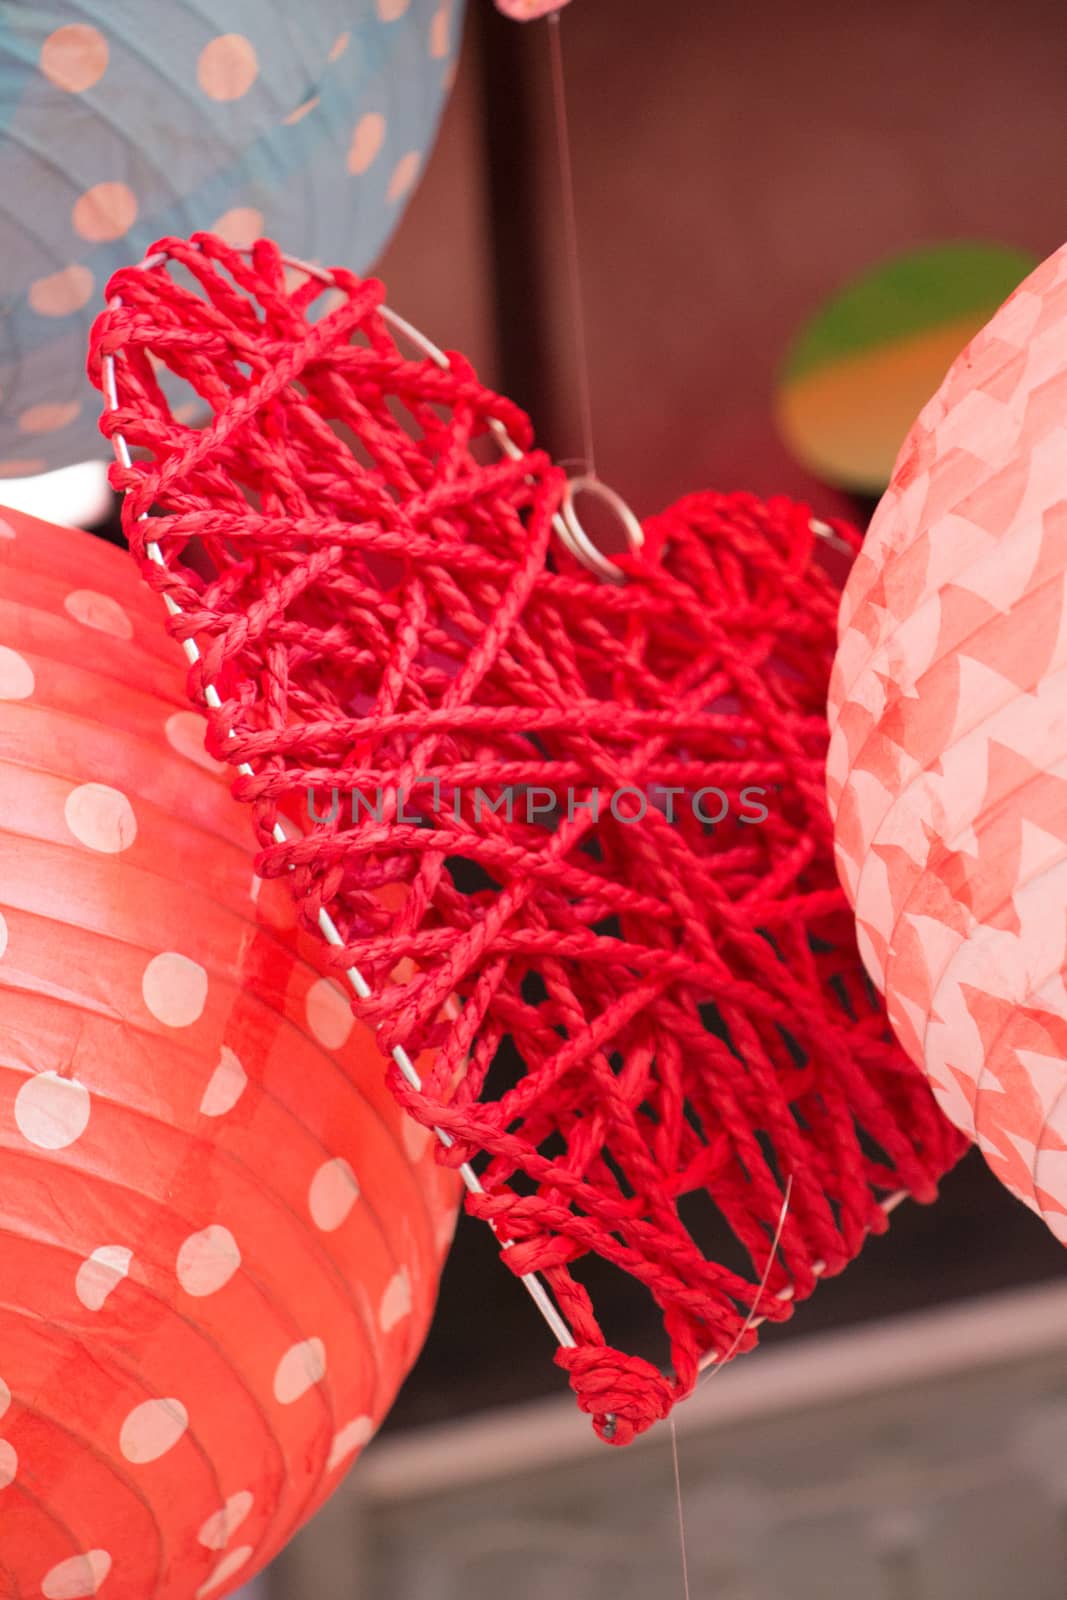 Colorful decorative objects in the shape of a heart